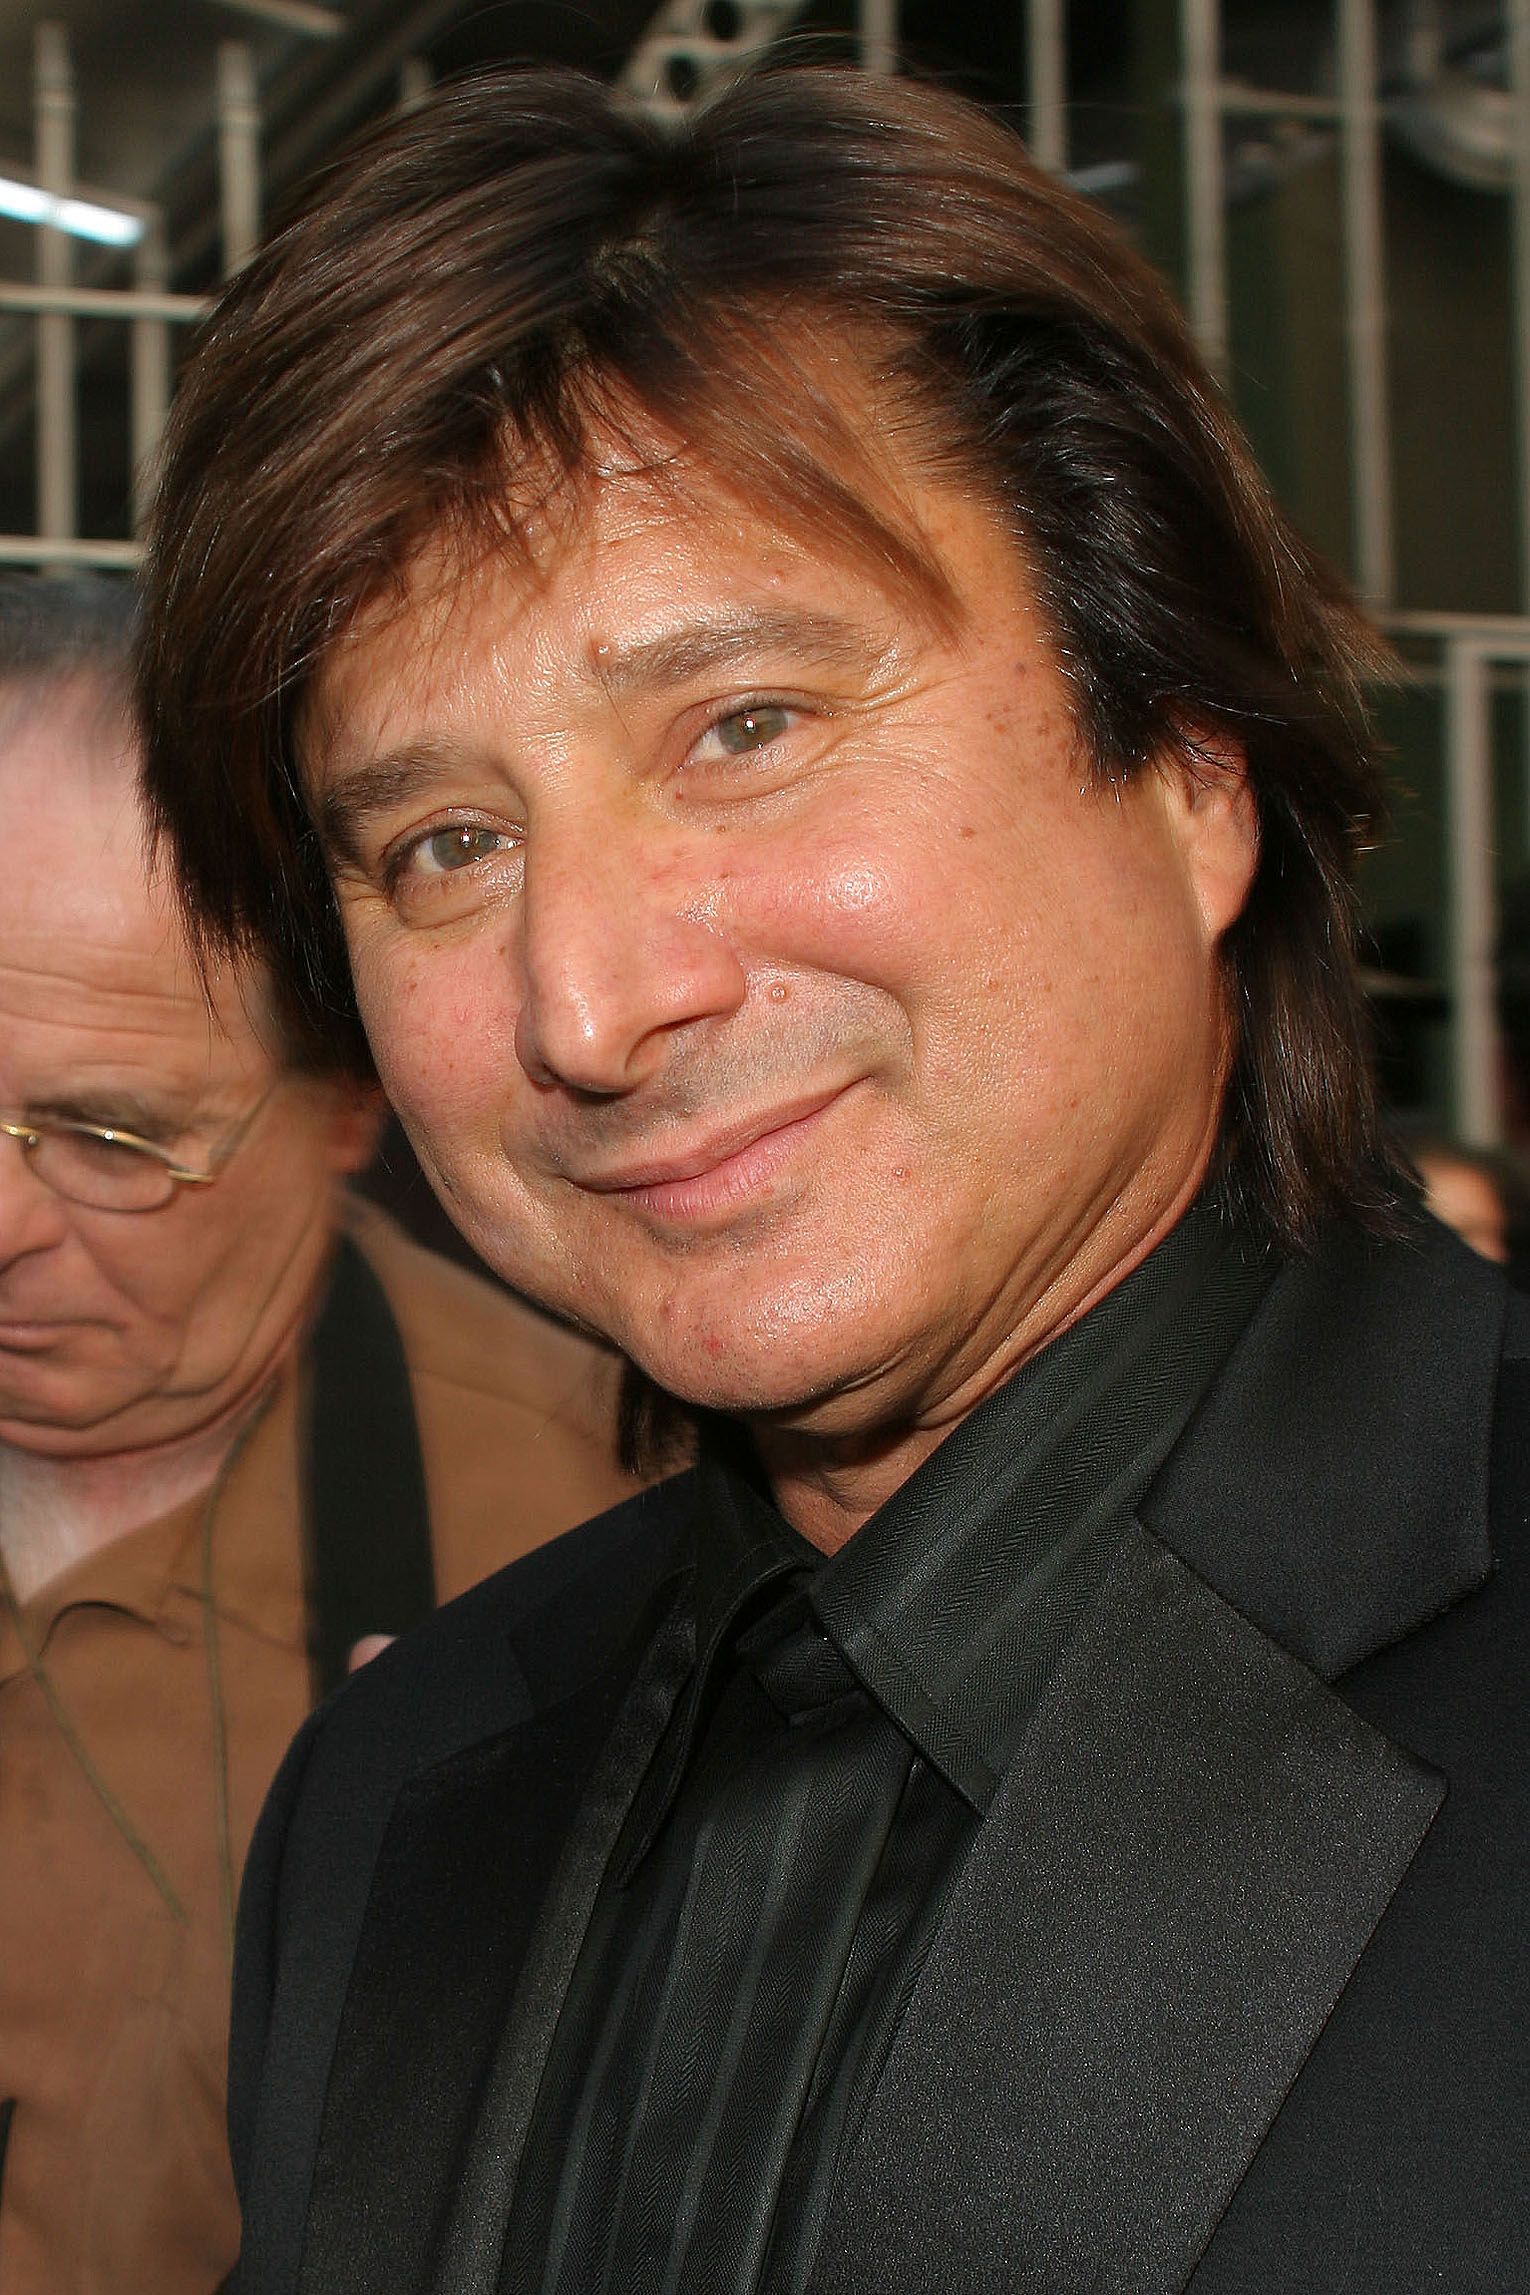 Is Steve Perry Still Feuding With The Rest Of Journey?